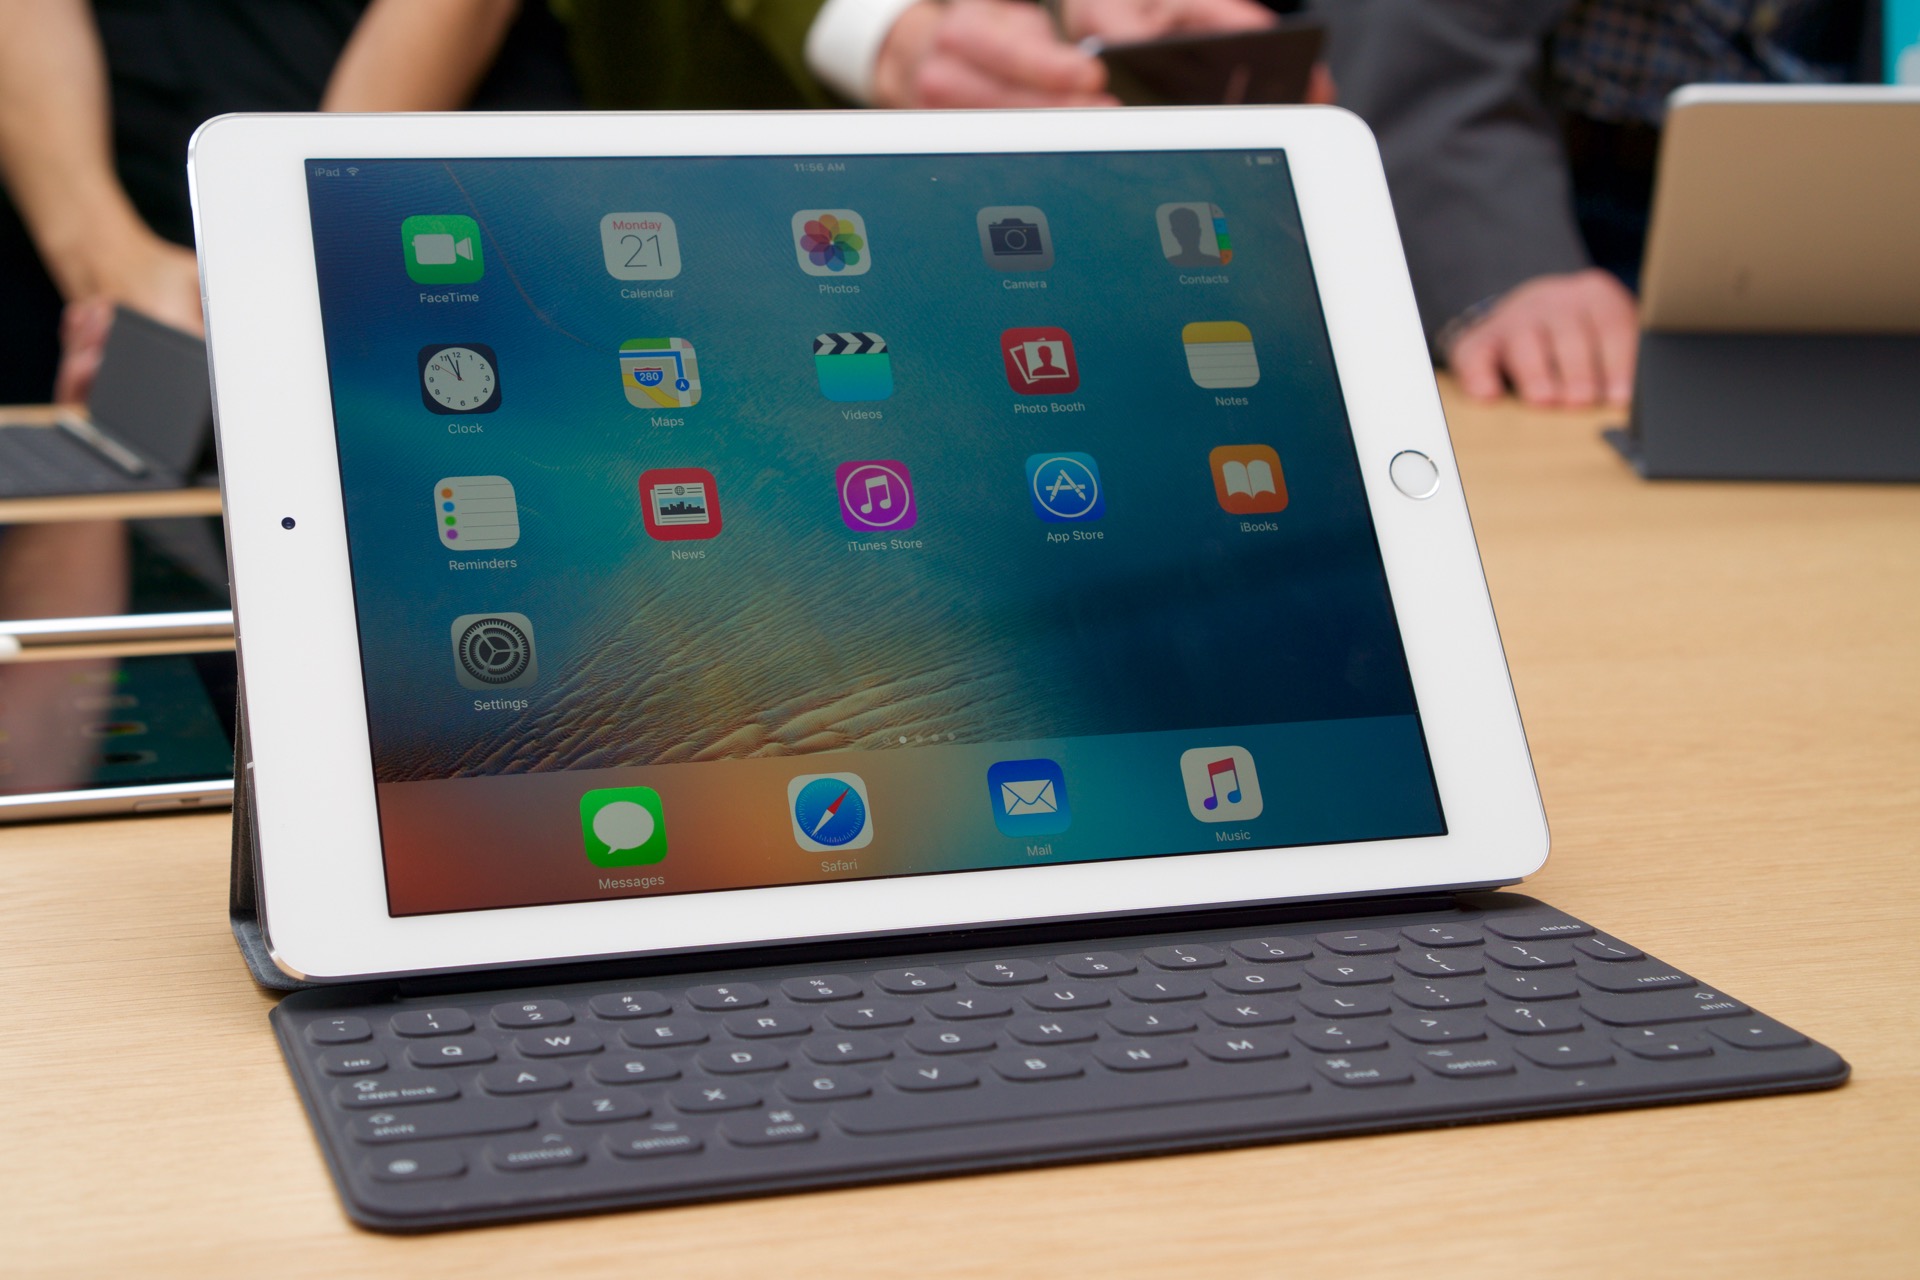 9.7-inch iPad Pro and iPhone SE both have 2GB of RAM | Ars Technica